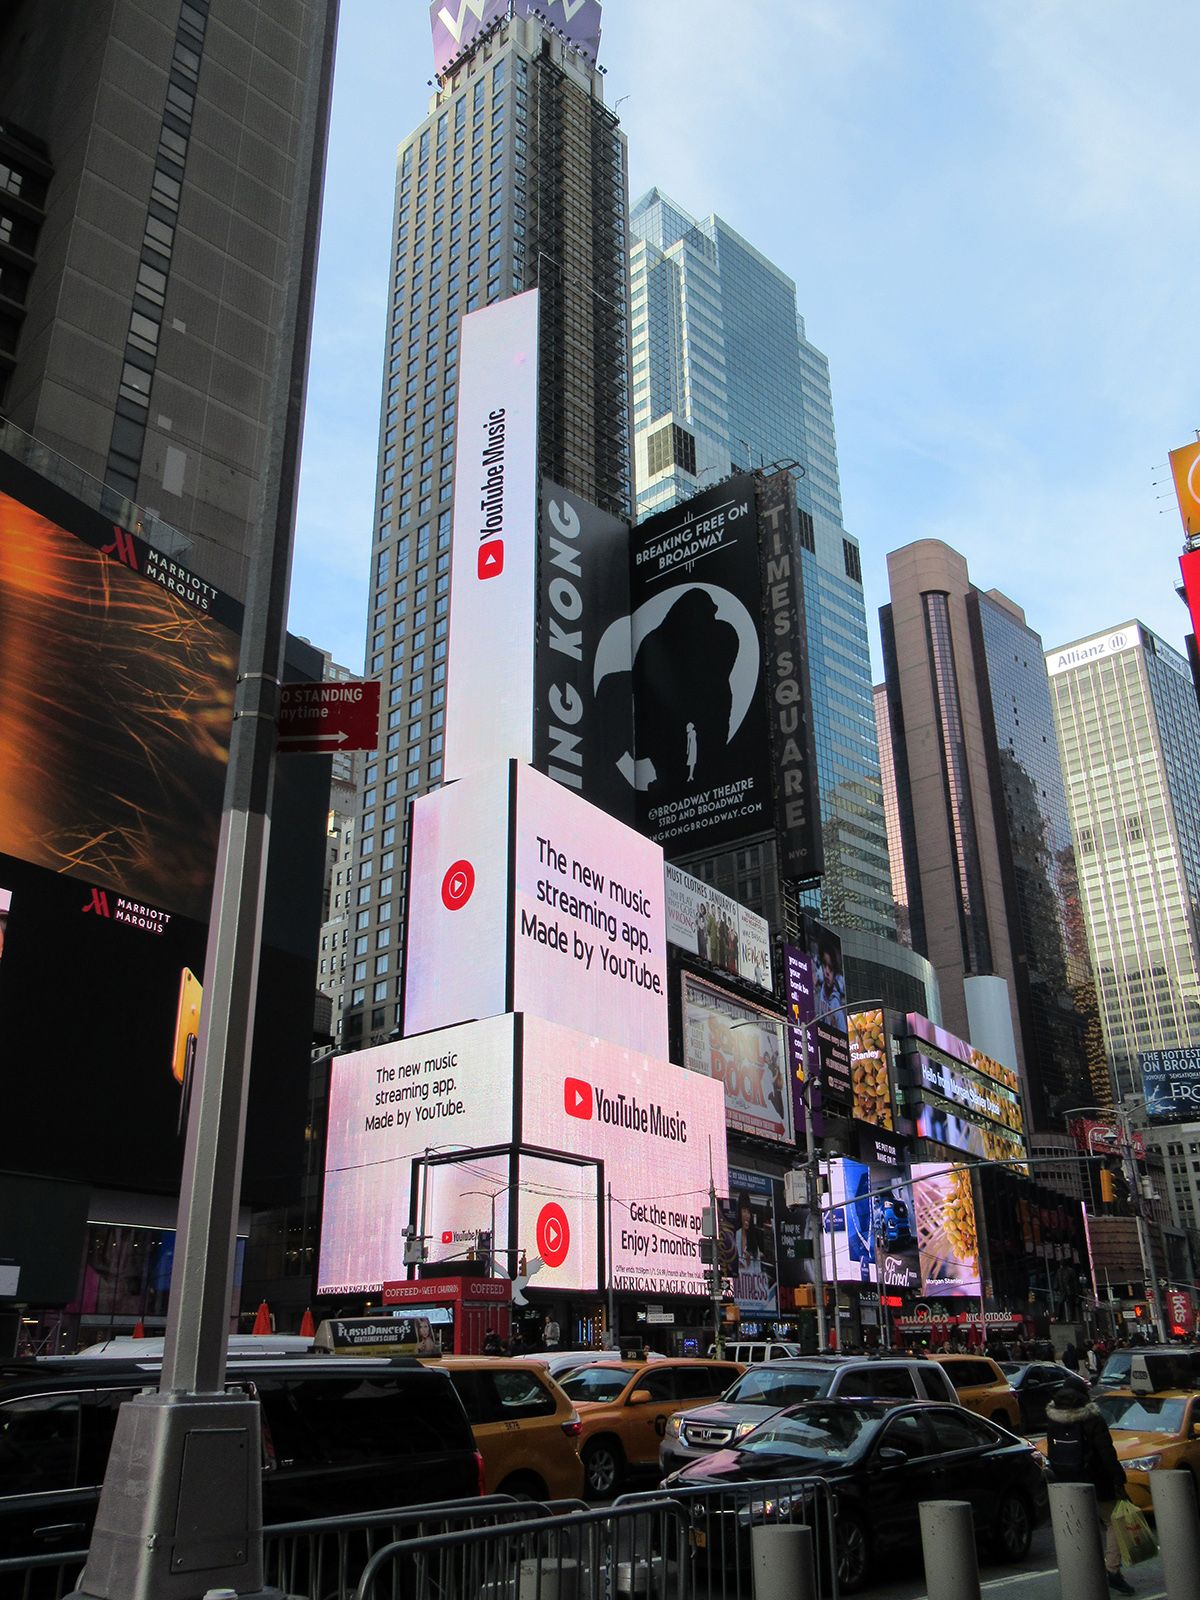 YouTube Music billboards covering corner of building in New York City. The new music steaming app. Made by YouTube